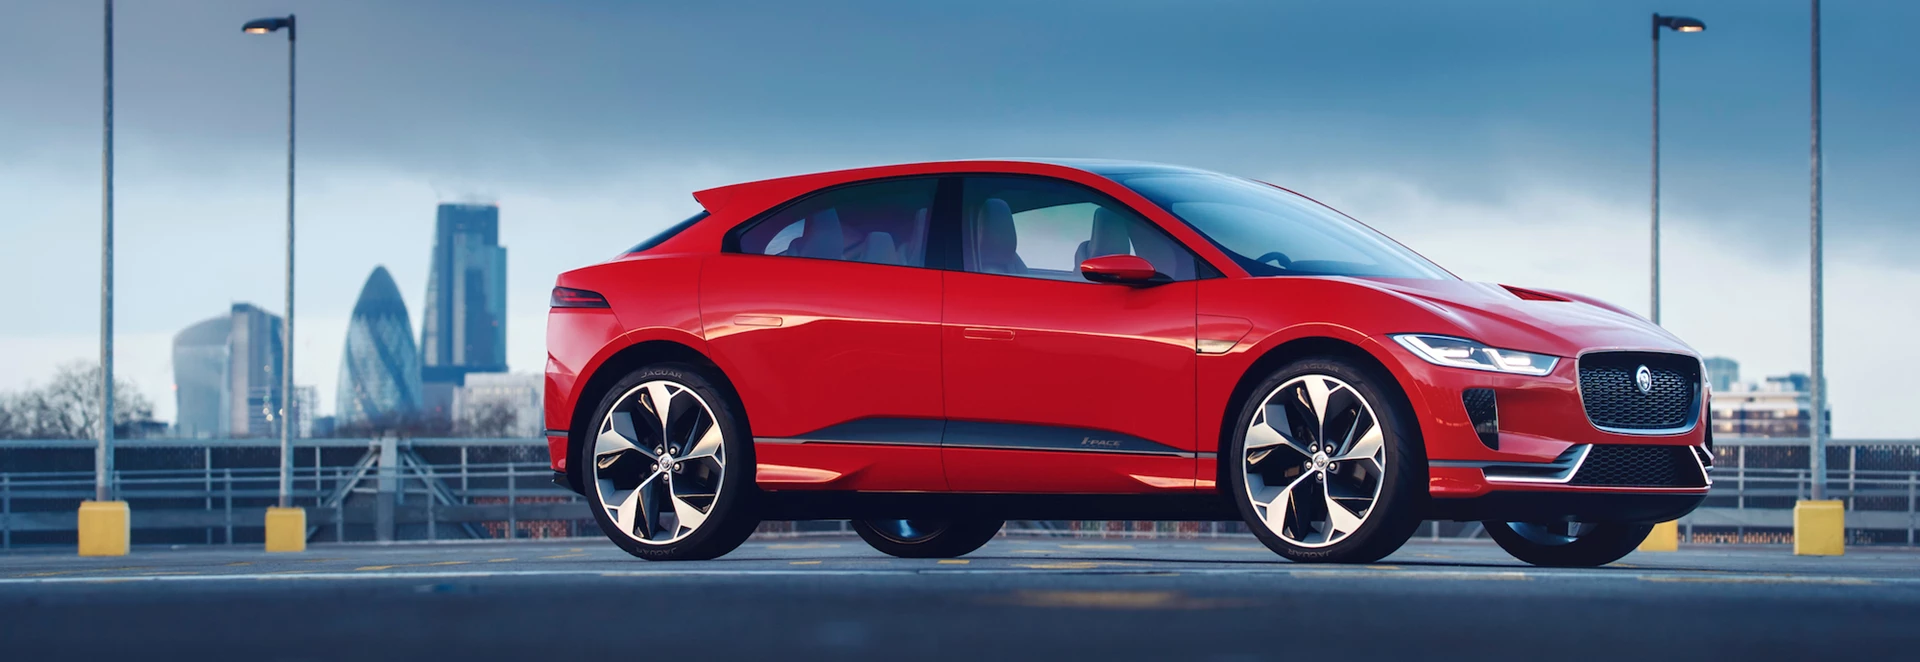 Jaguar I-Pace voted ‘Most Anticipated Car of 2018’